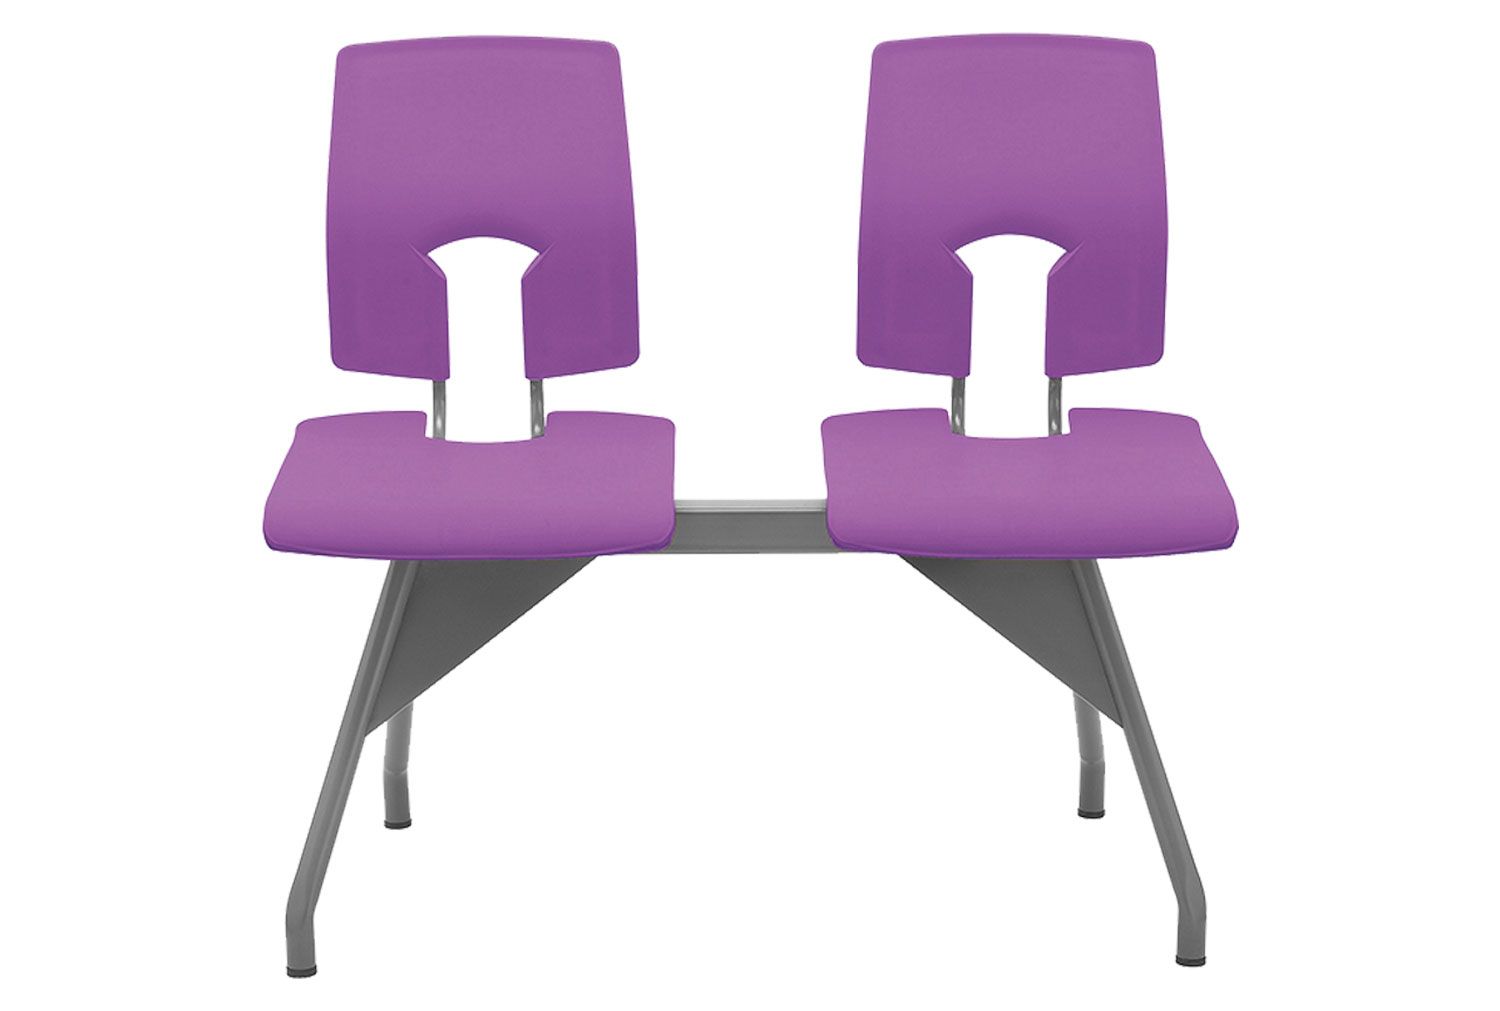 SE Beam Seating With 2 Seats, Dark Grey Frame, Pacific Blue